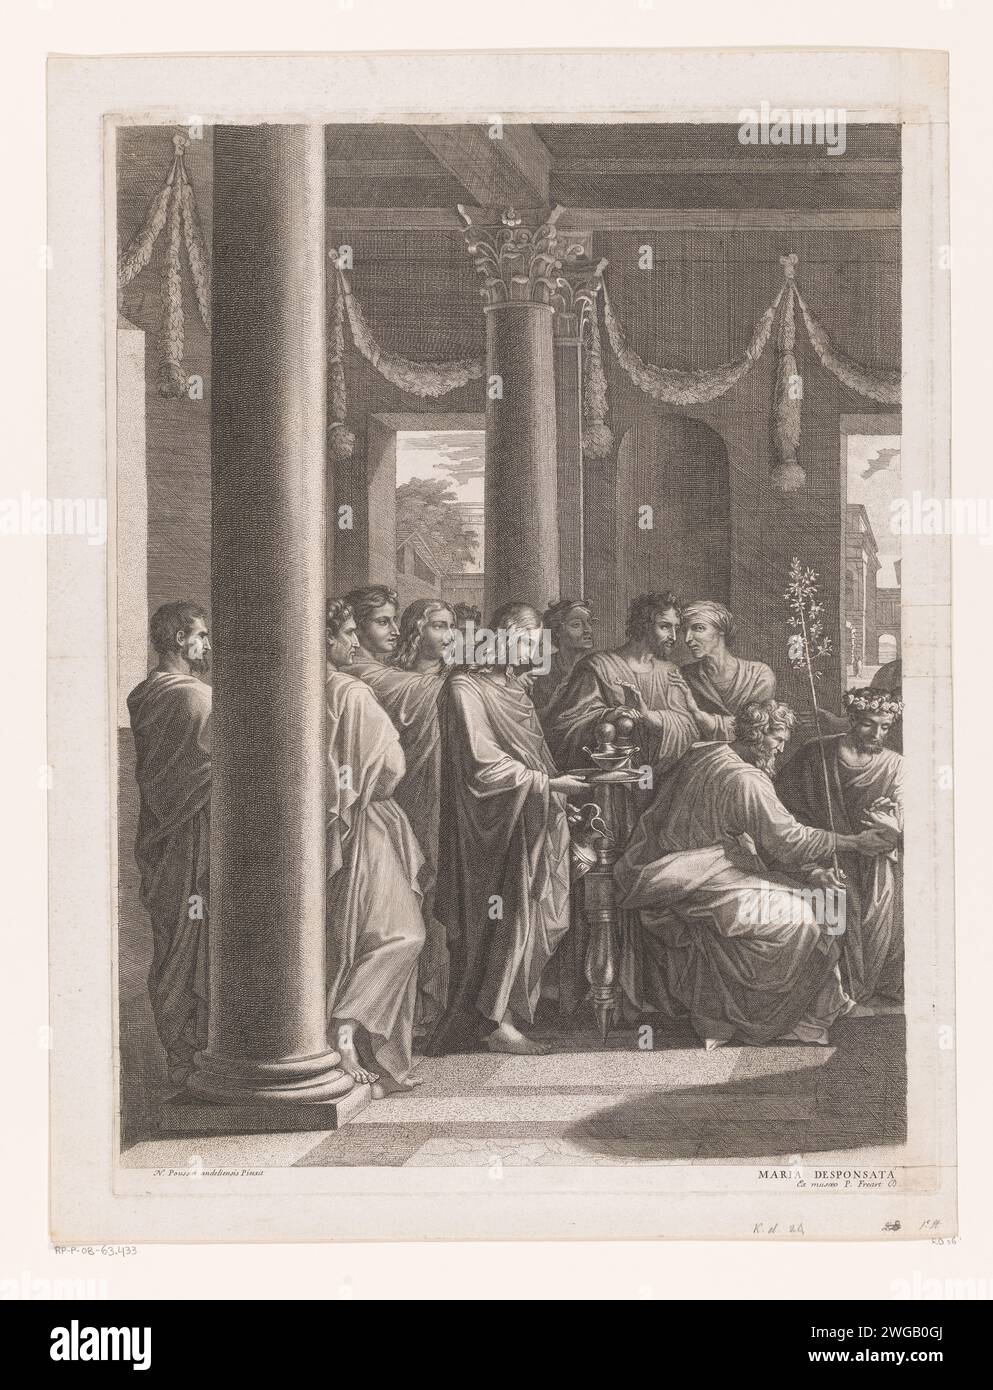 Marriage of Maria and Jozef (left part), Jean Pesne, After Nicolas Poussin, 1633 - 1700 print Sacrament of marriage. France paper etching marriage of Mary and Joseph, 'Sposalizio': they are married by the high priest. marriage in church  the sixth of the seven sacraments Stock Photo